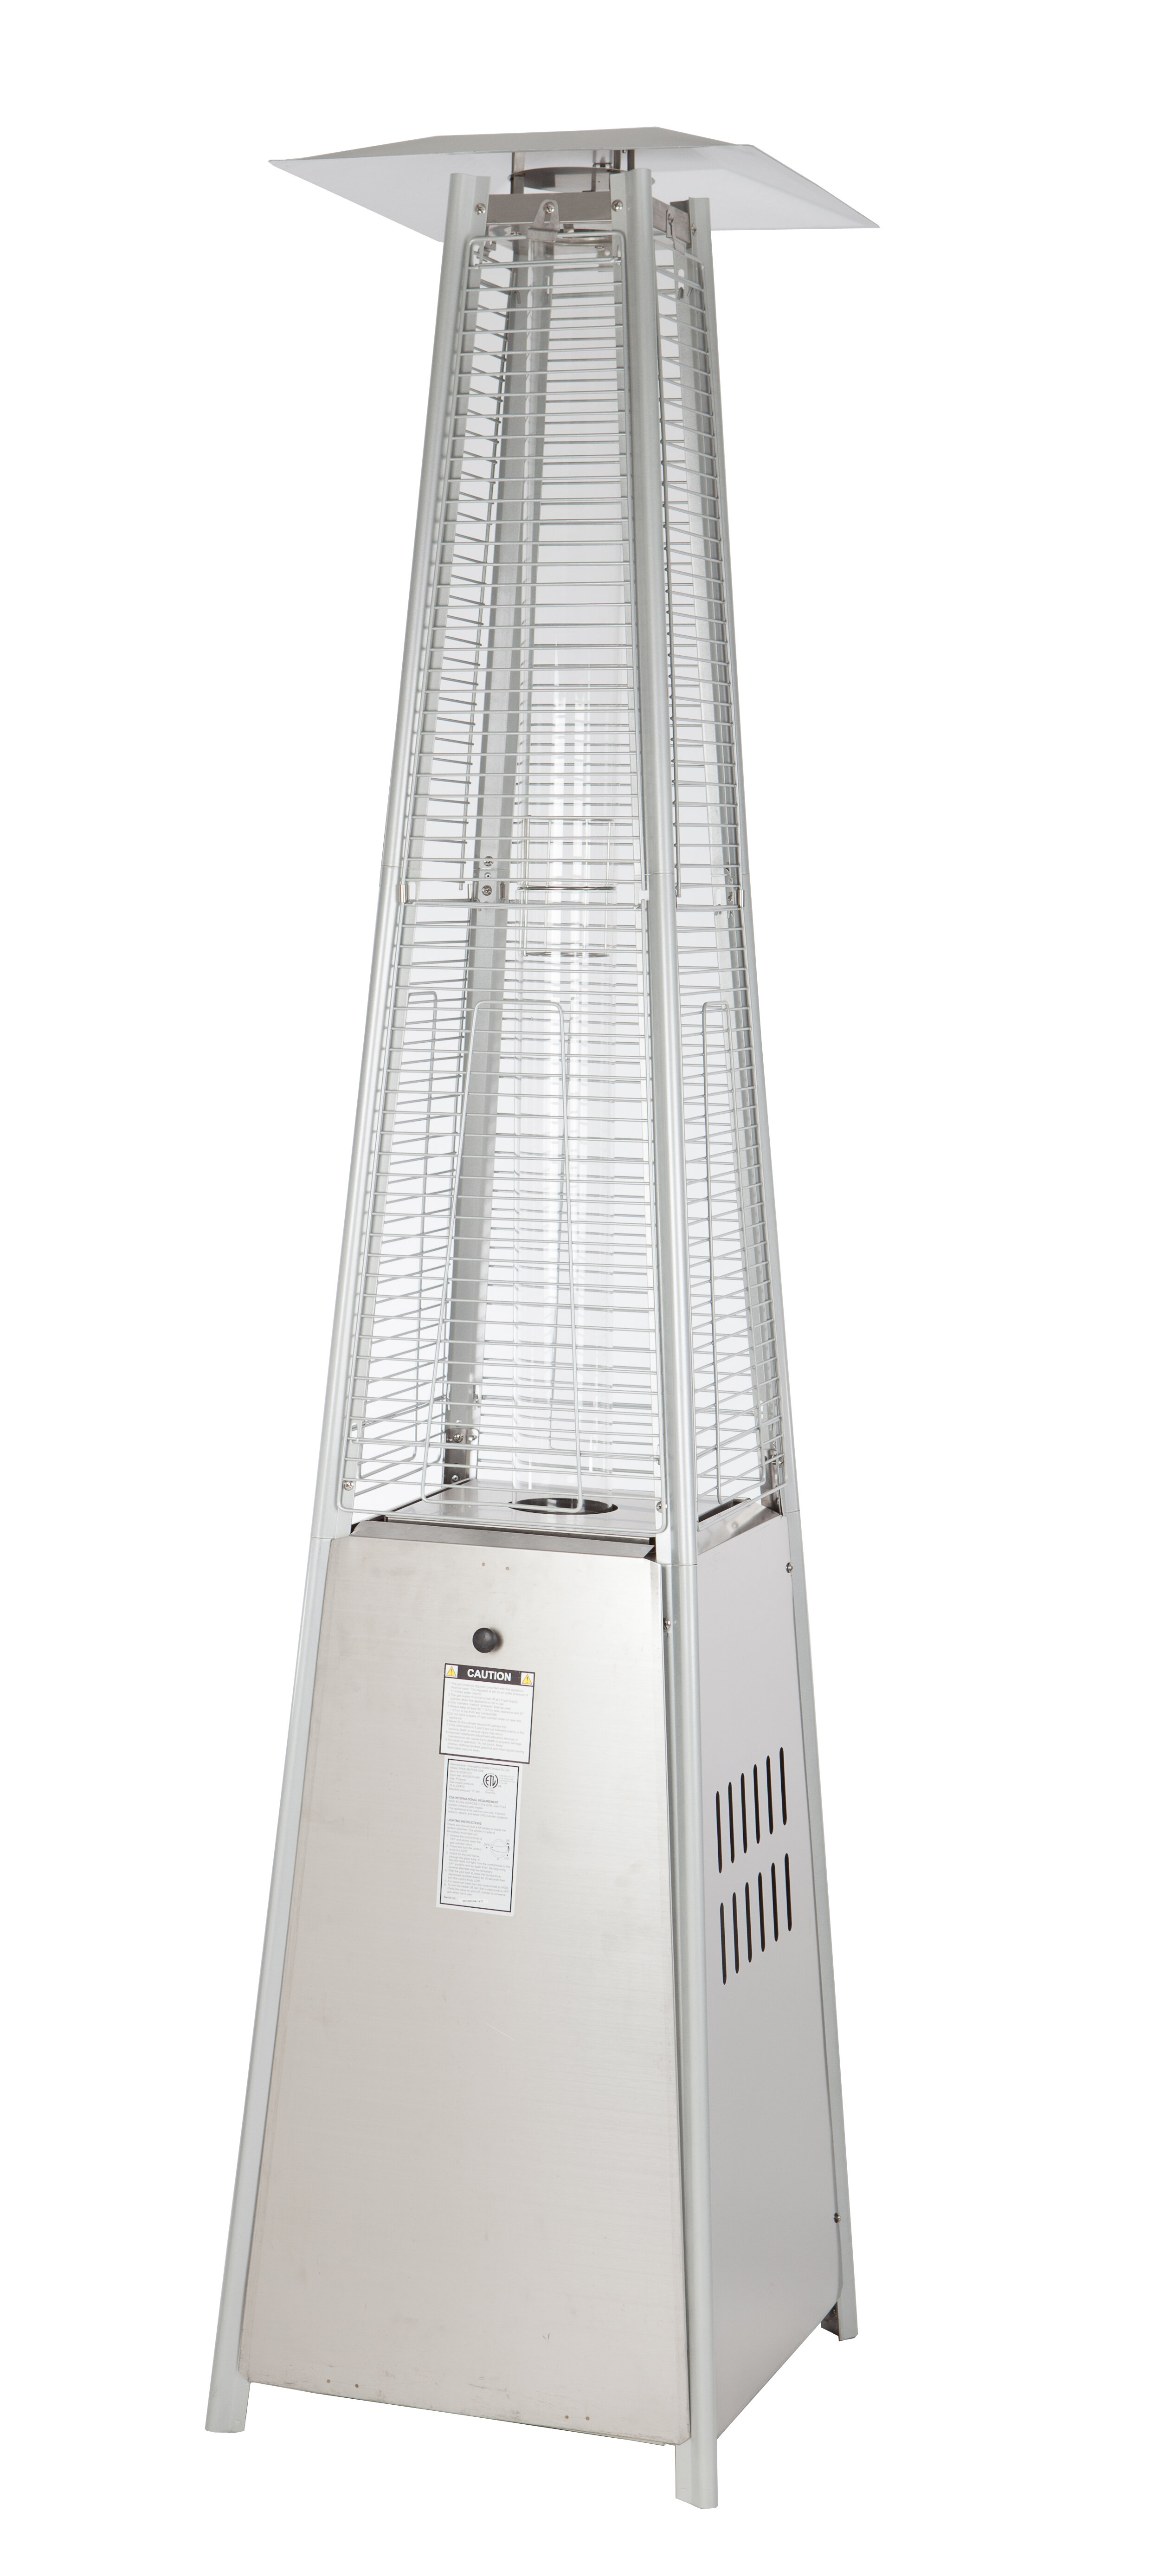 Fire Sense Pyramid Flame 40000 Btu Propane Patio Heater intended for size 2498 X 5551